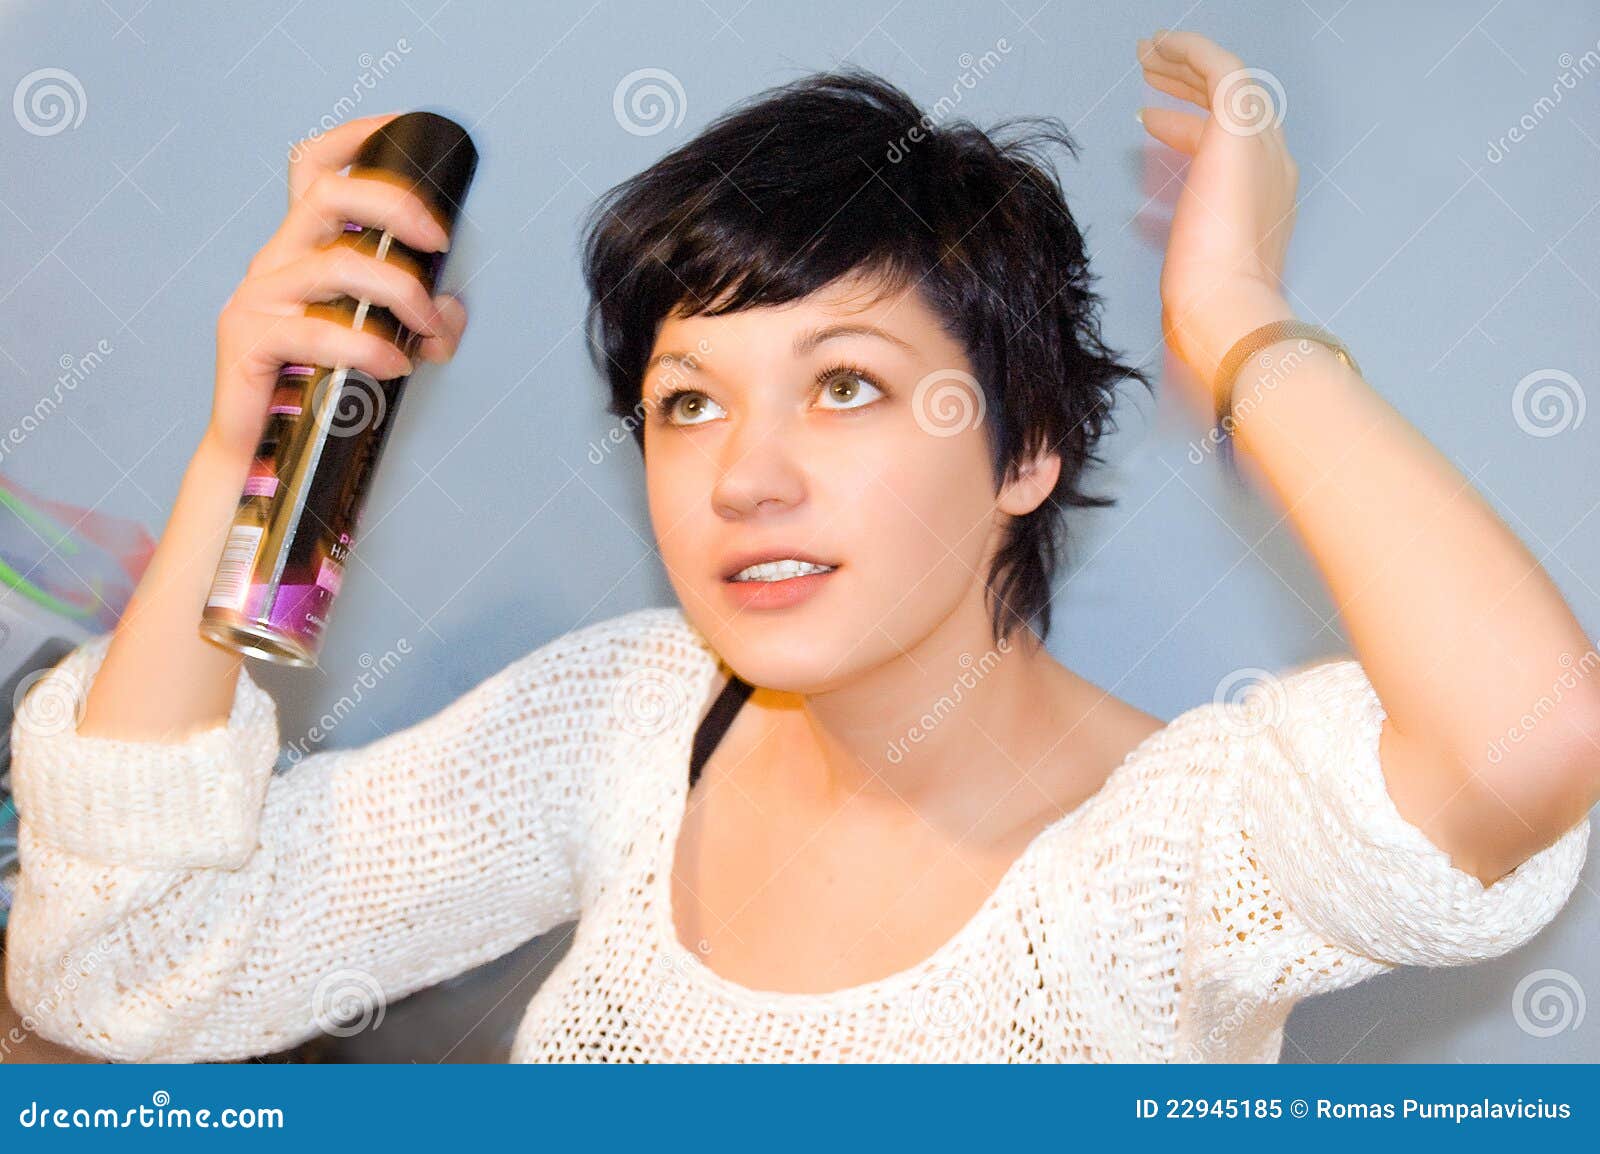 girl spraying hair lacquer onto her hair